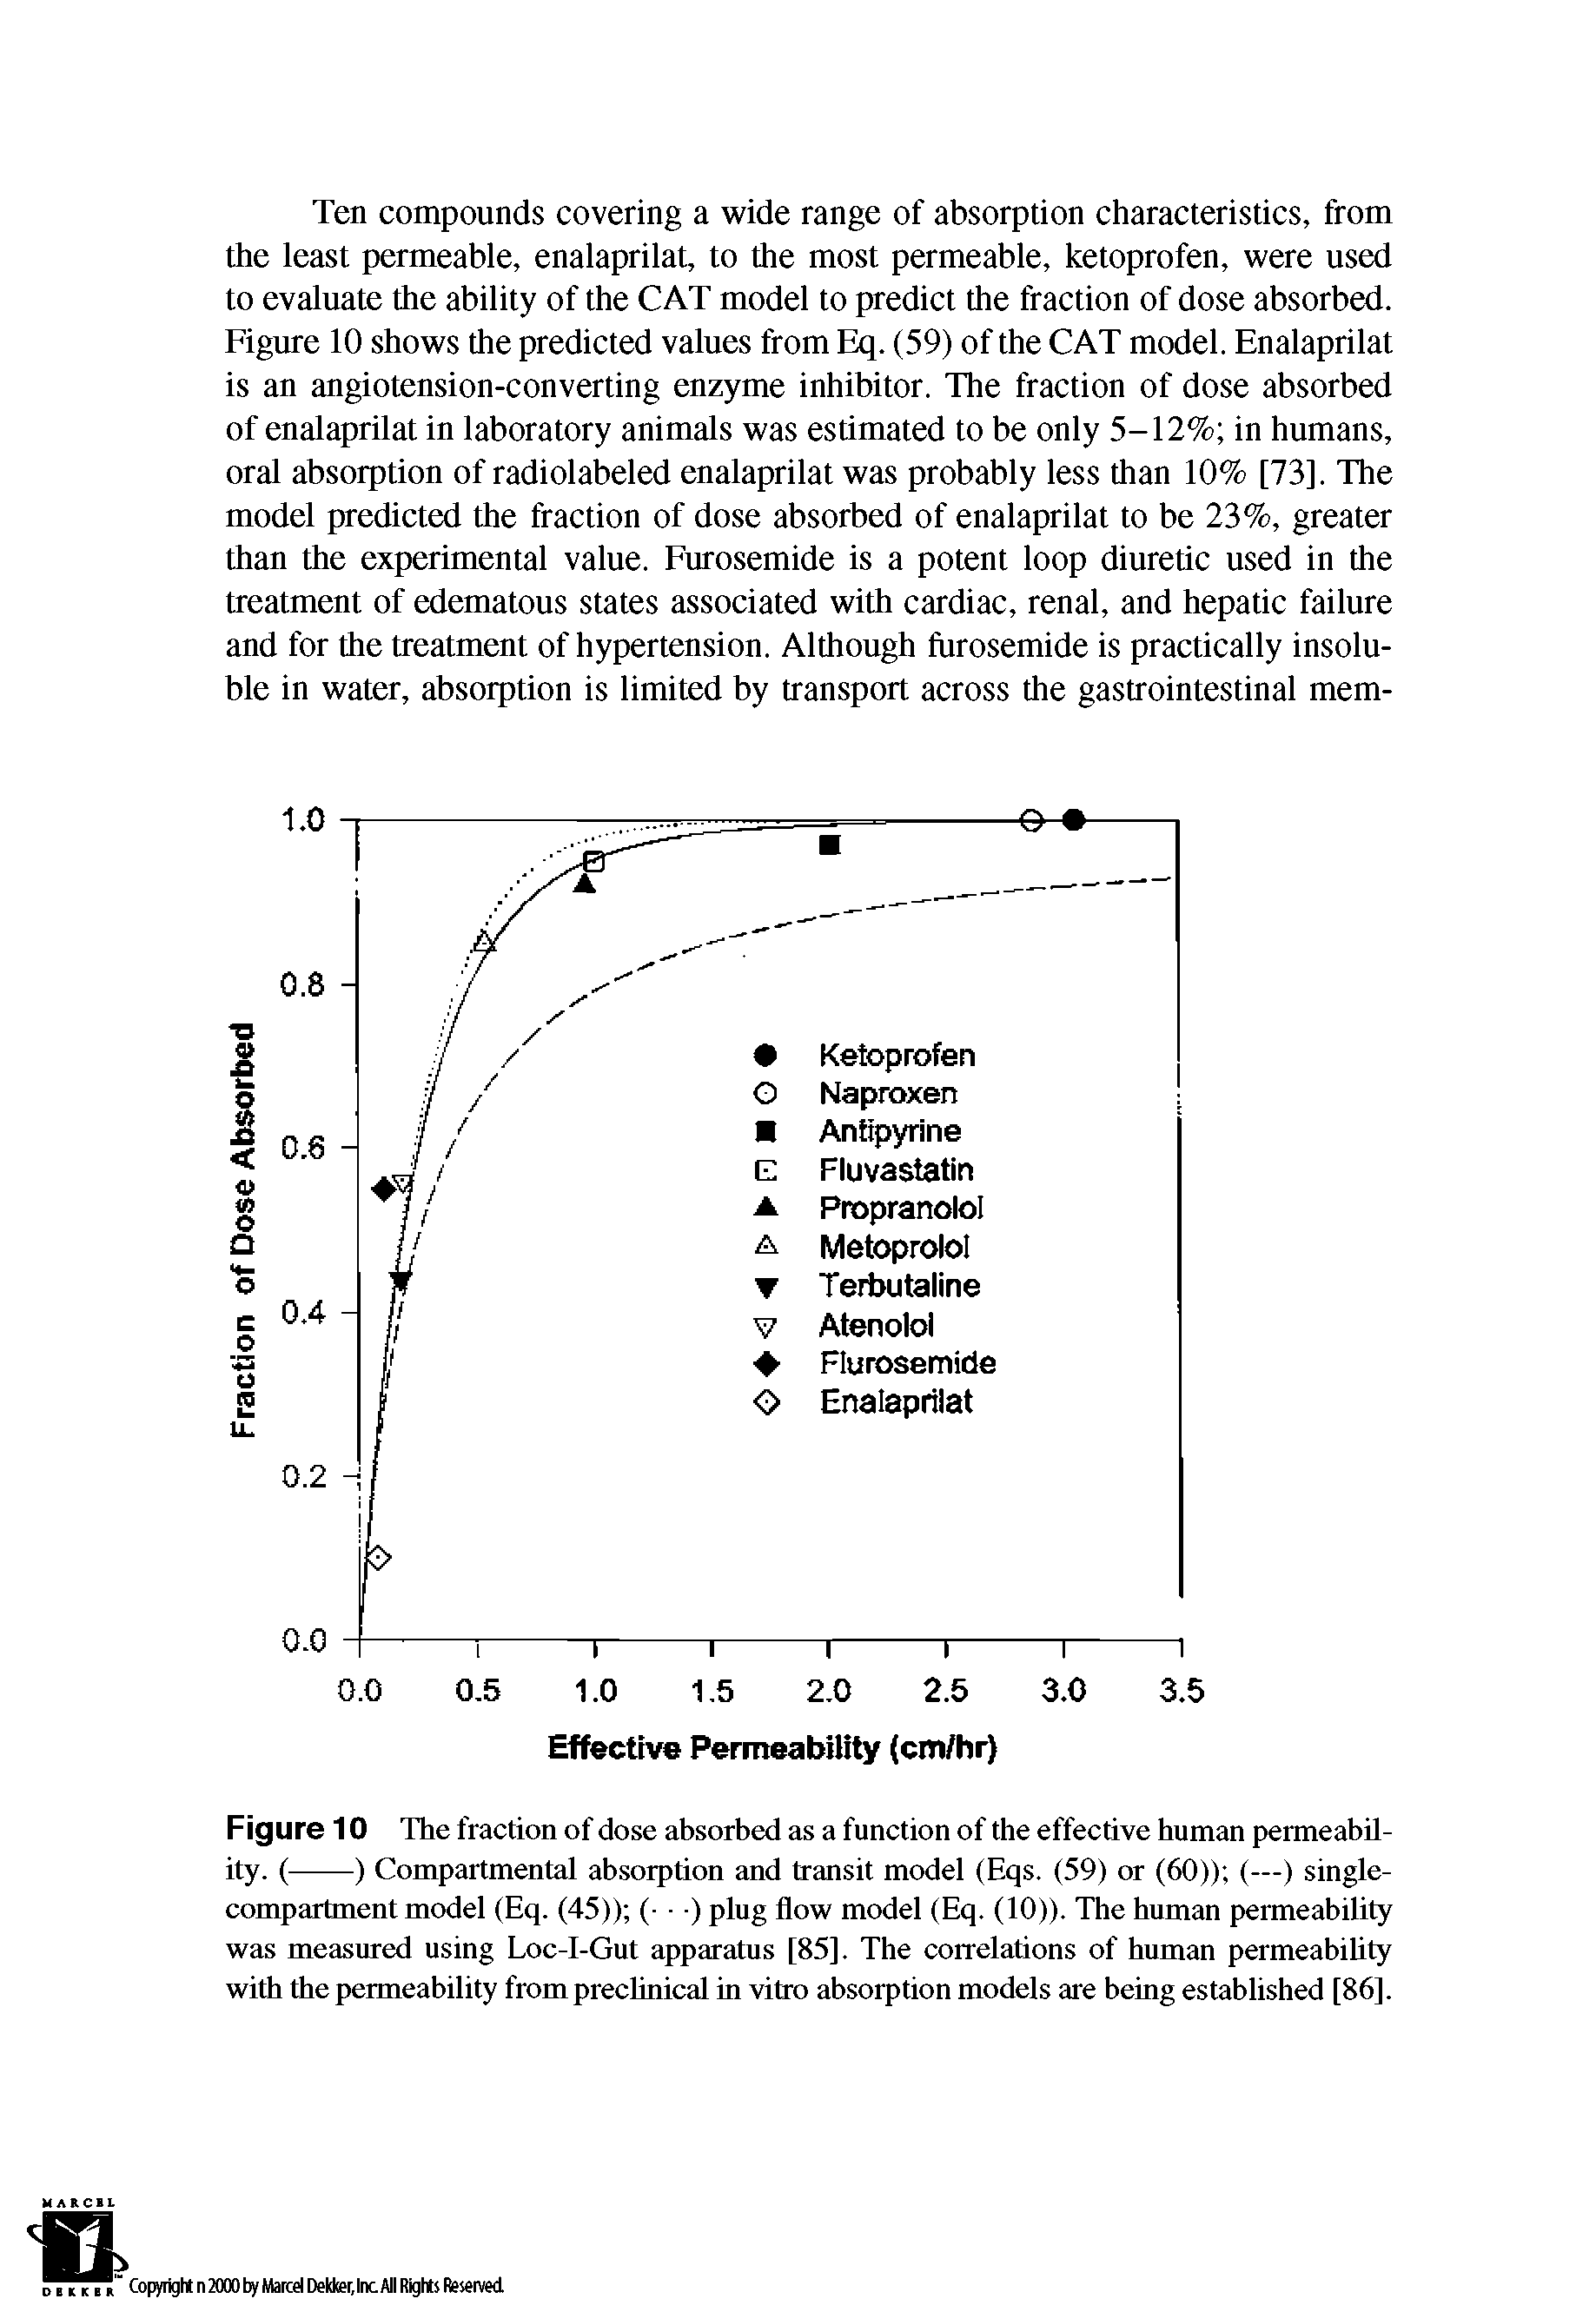 Figure 10 The fraction of dose absorbed as a function of the effective human permeability. (---) Compartmental absorption and transit model (Eqs. (59) or (60)) (—) single-...